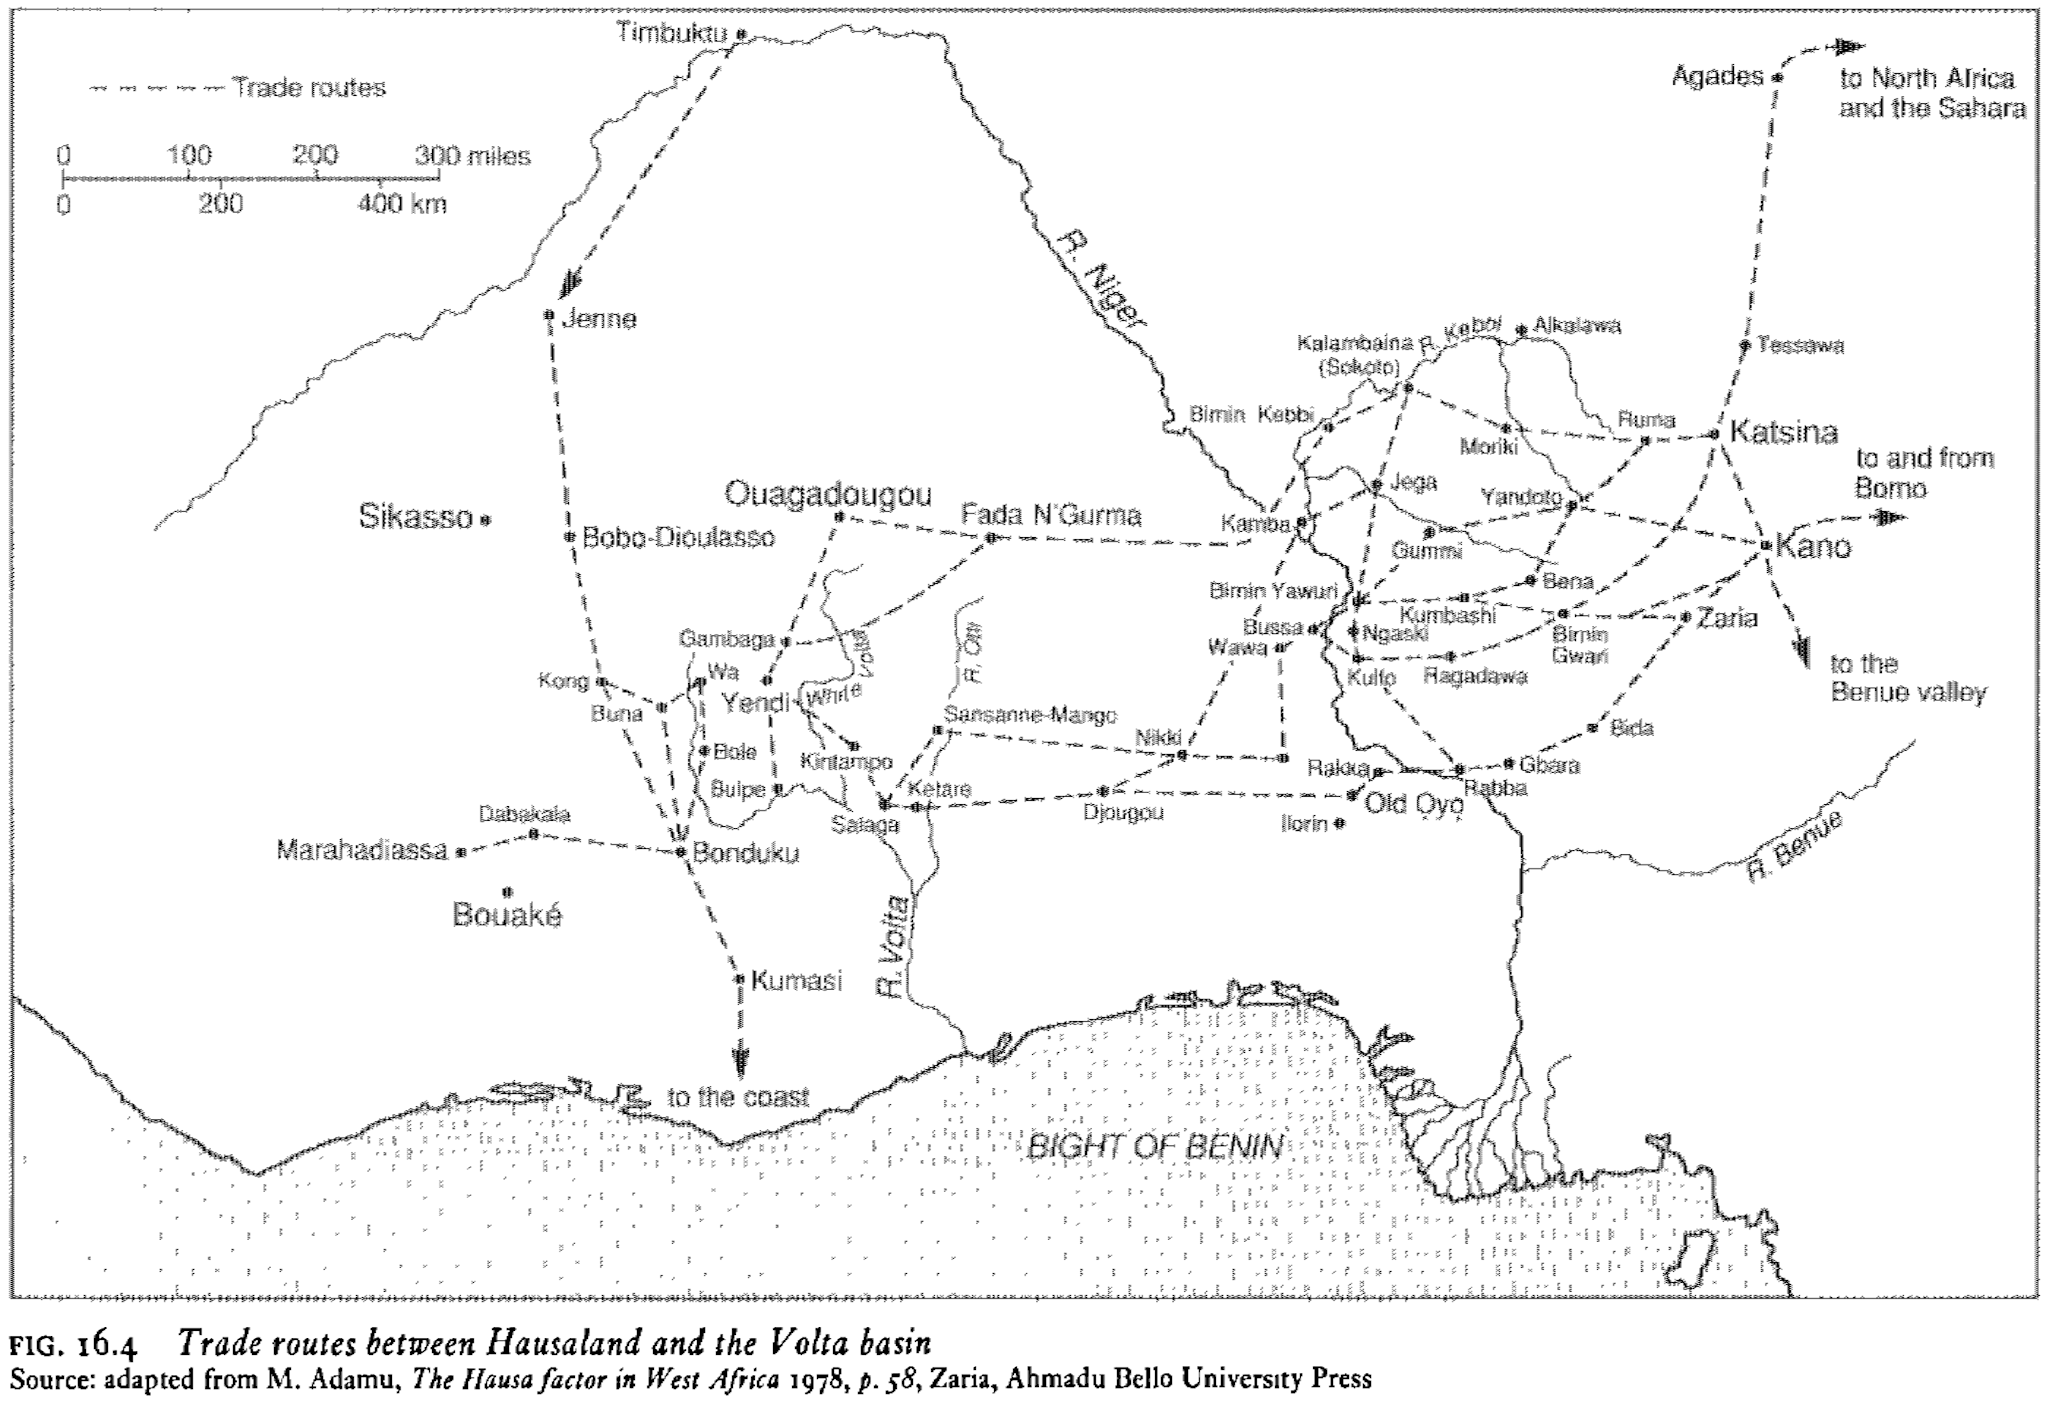 Trade routes between Hausaland and the Volta basin.png